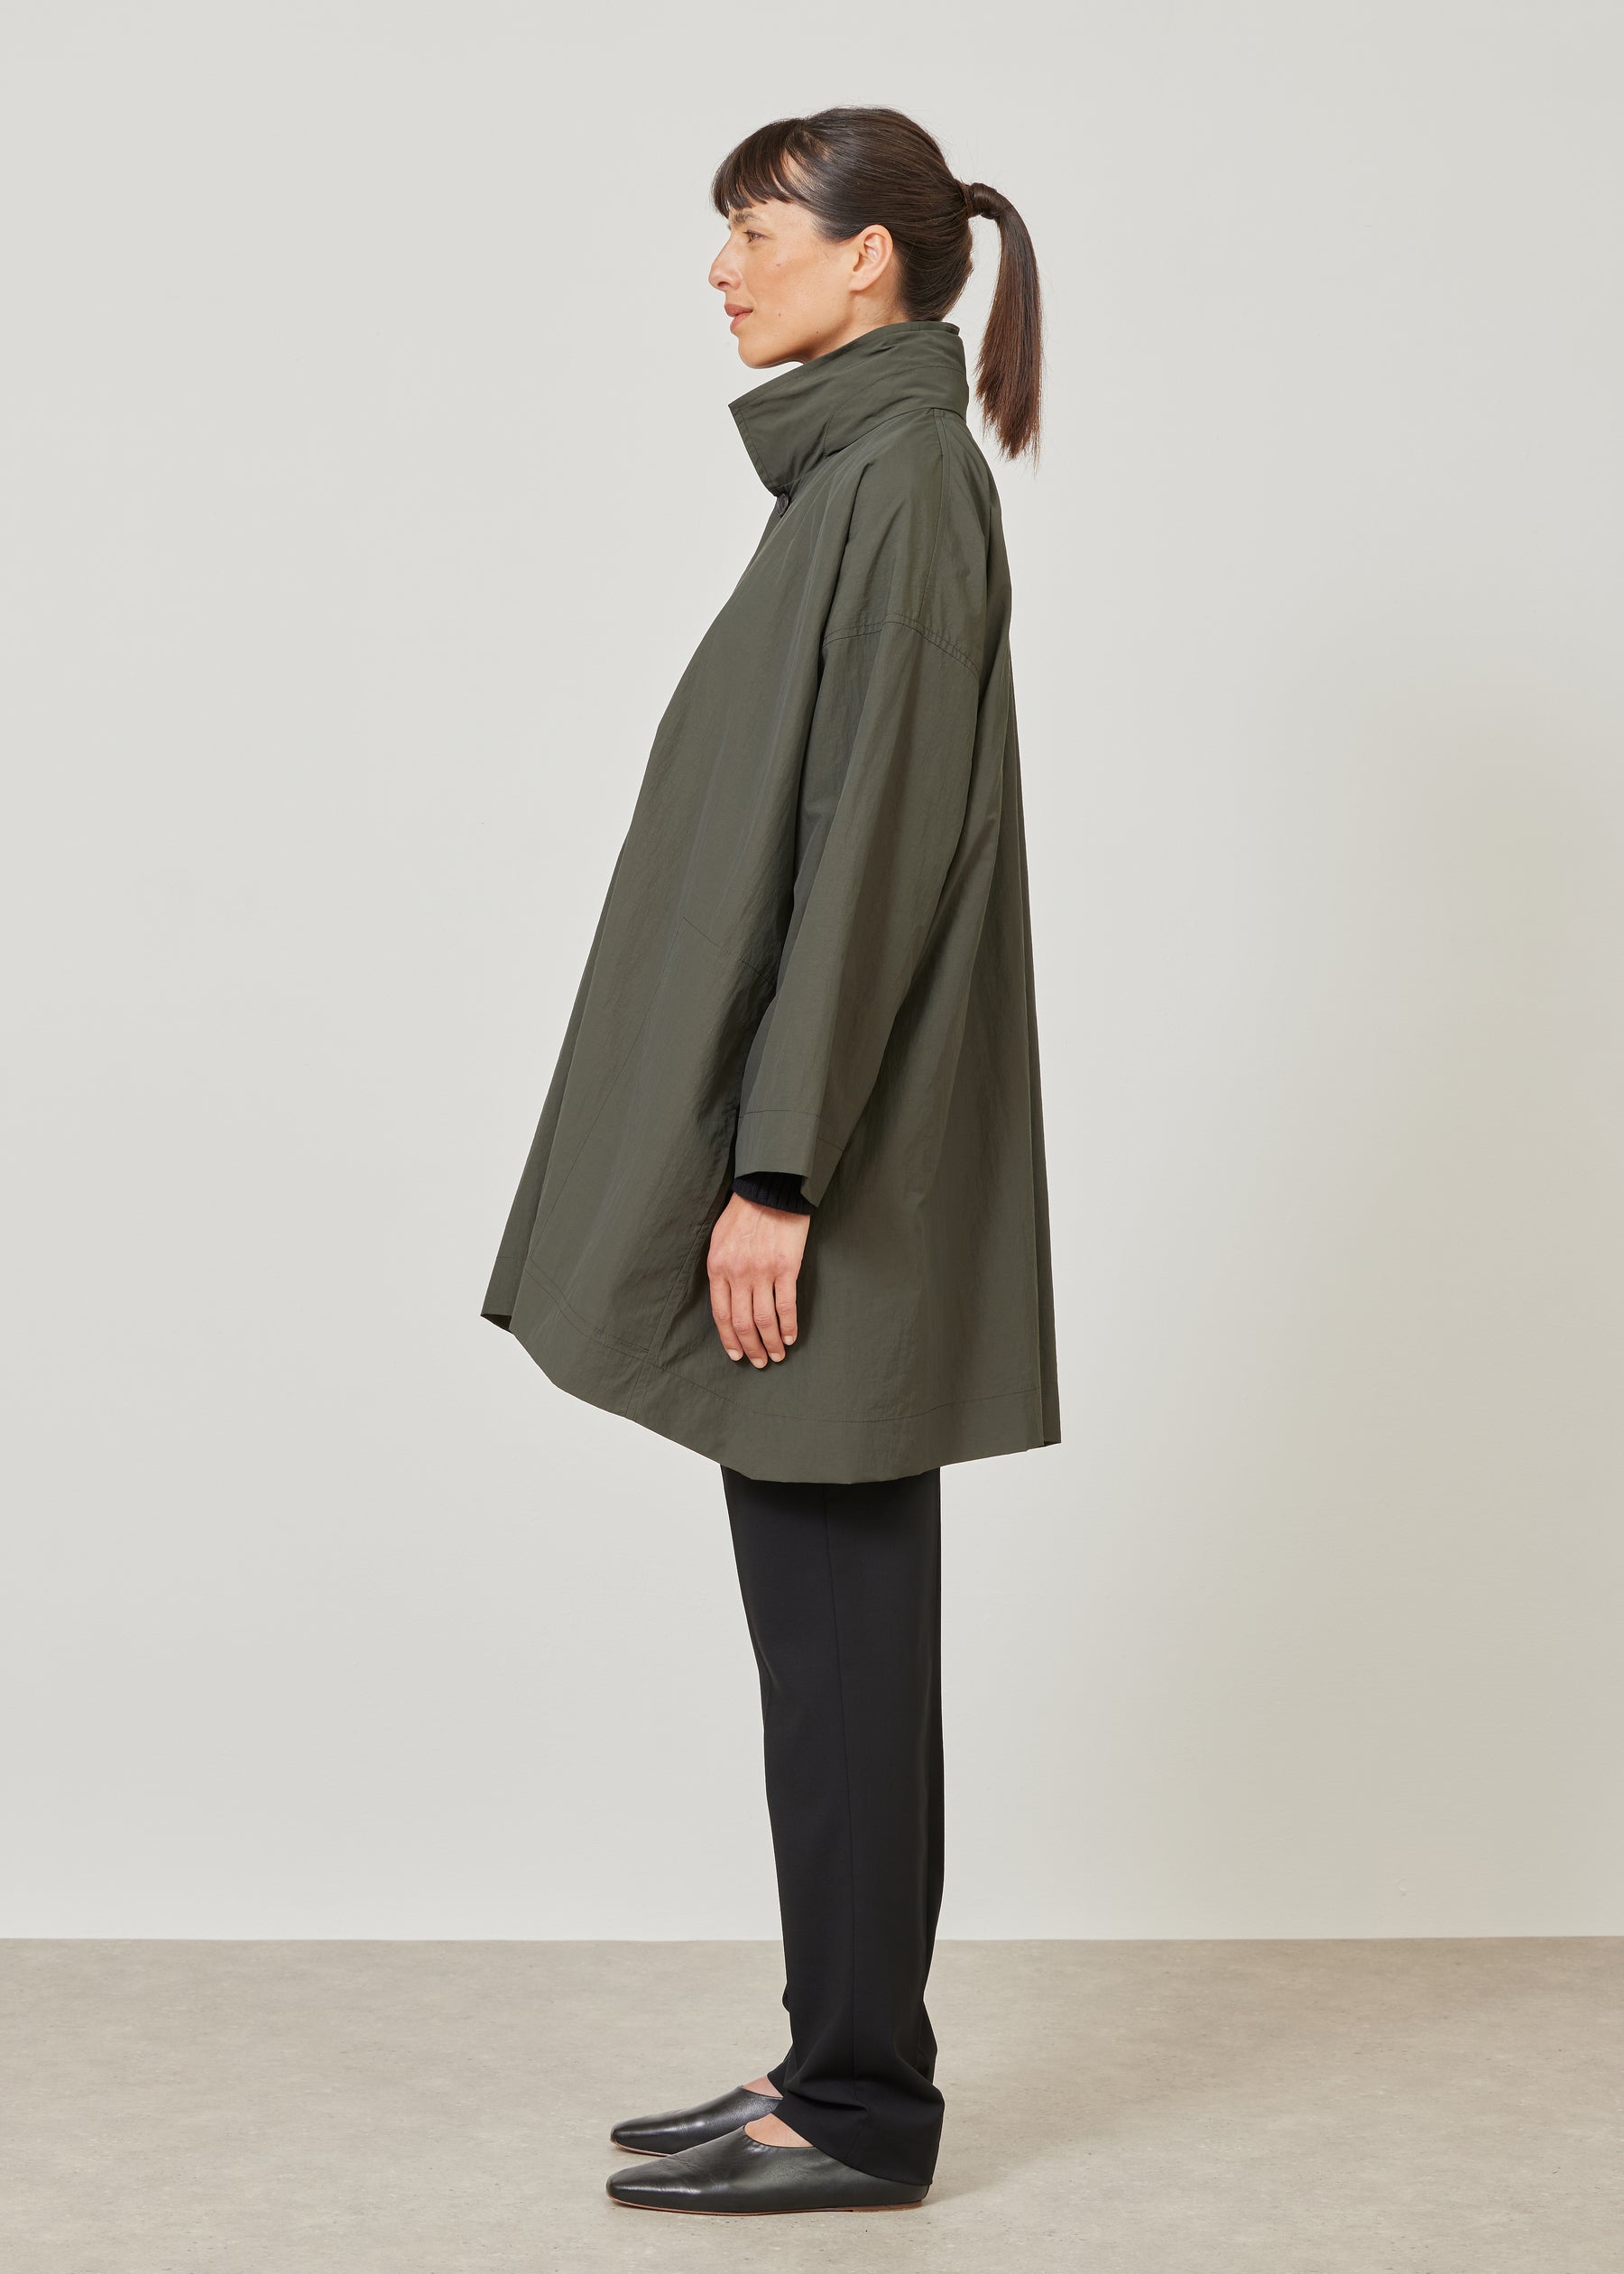 smaller front larger back high neck coat with button away hood - long plus